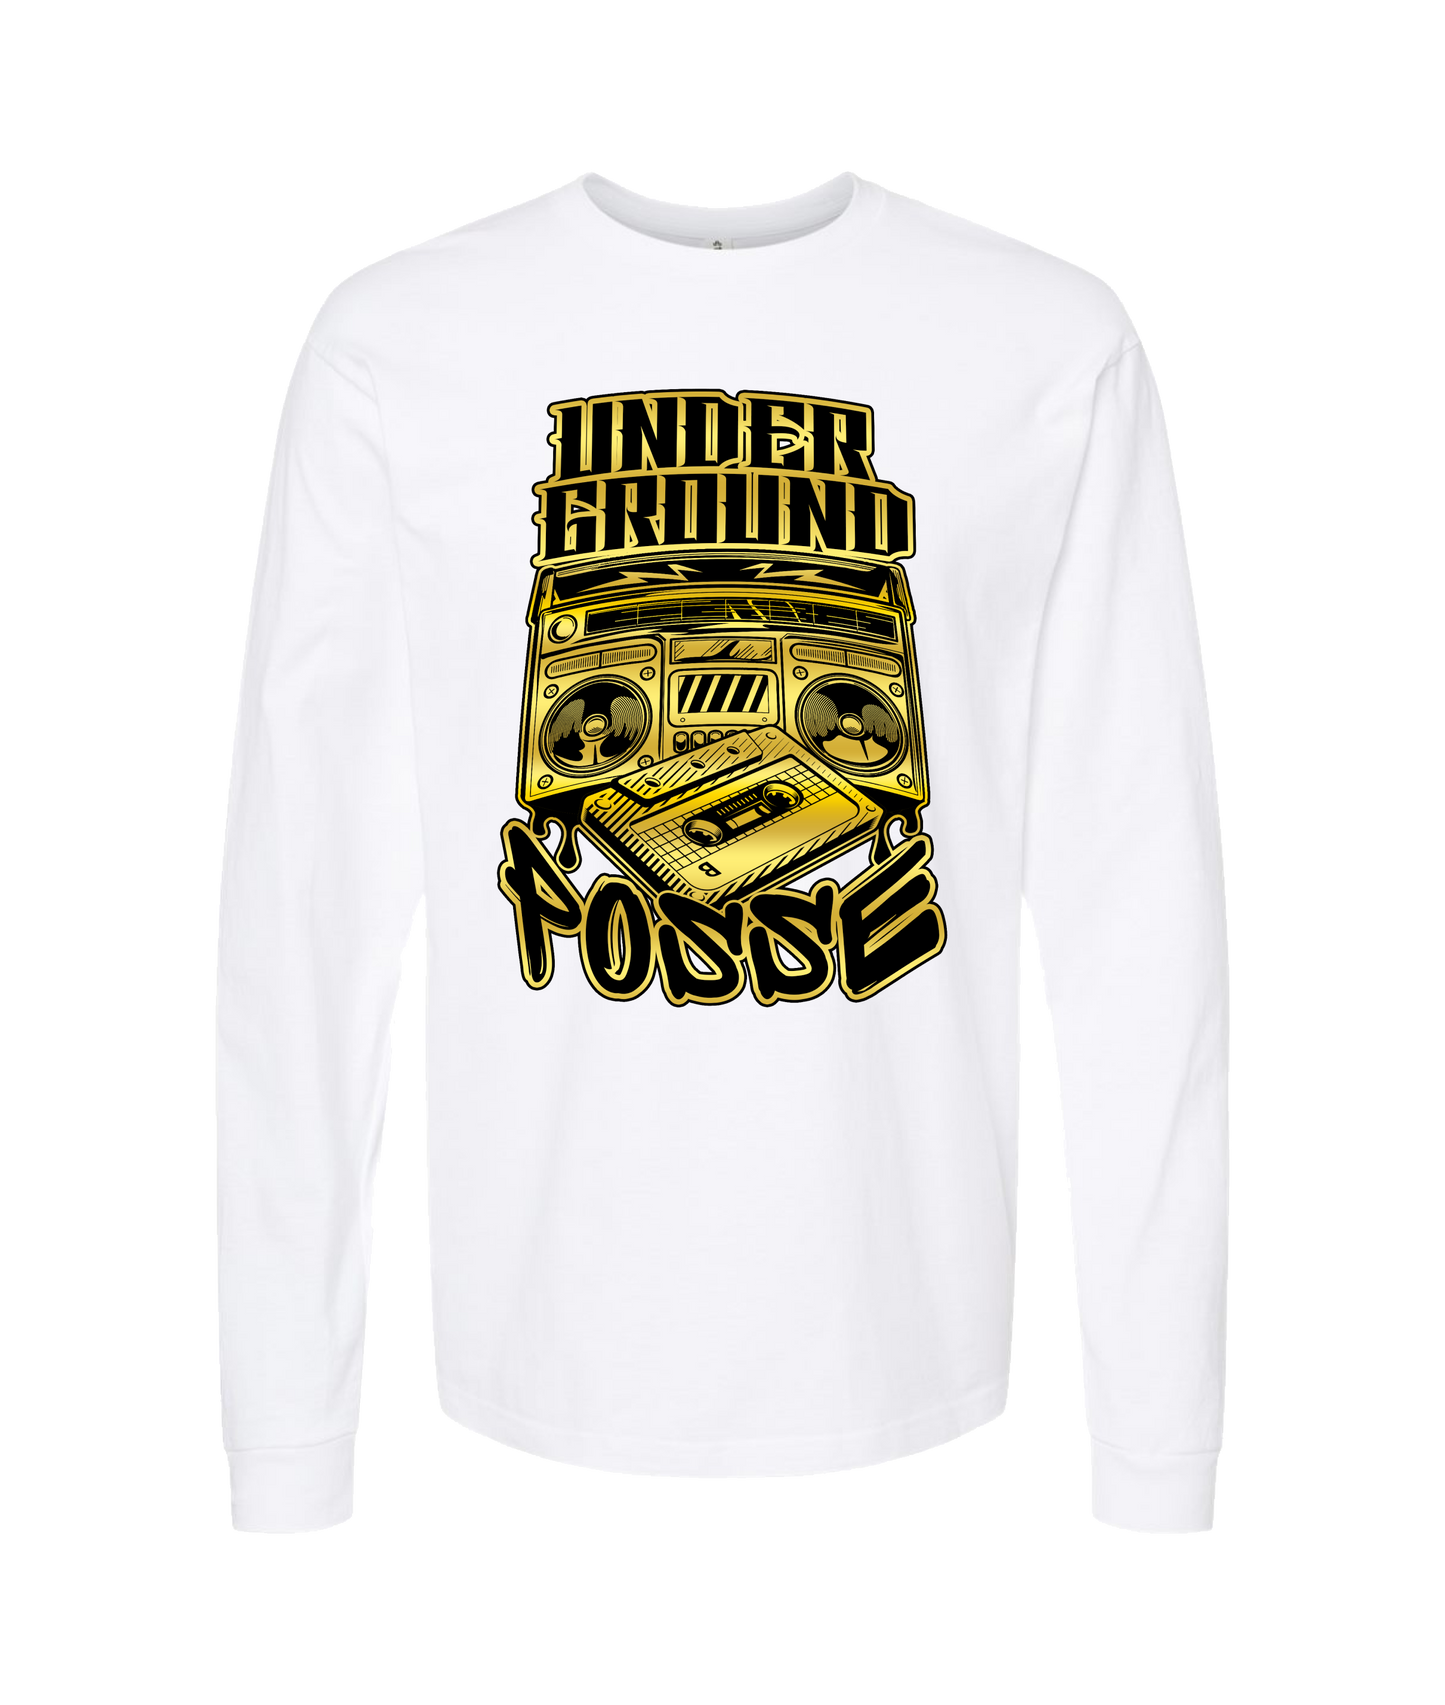 The Posse Store - UGP - White Long Sleeve T